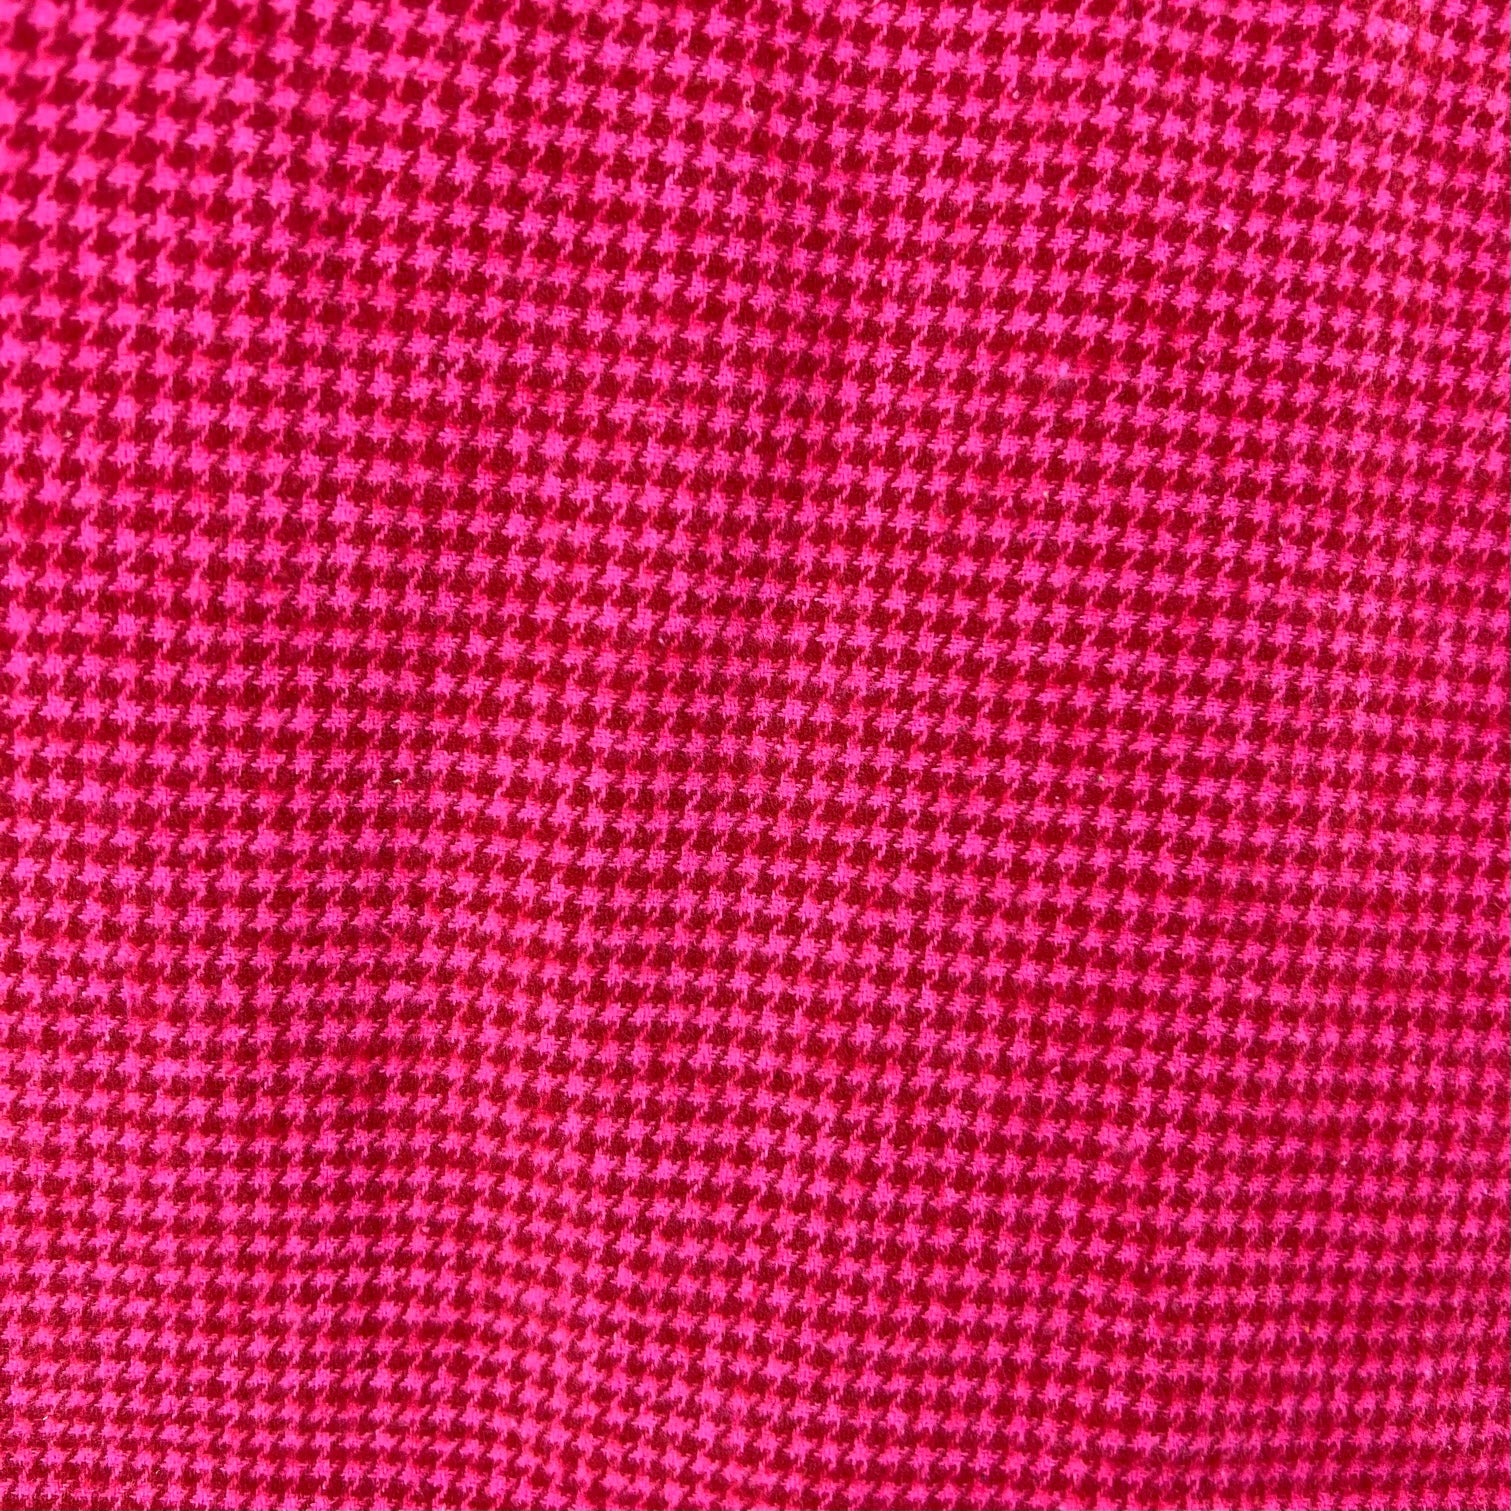 Red and Bright Pink Houndstooth Plaid Flannel Infinity or Blanket Scarf